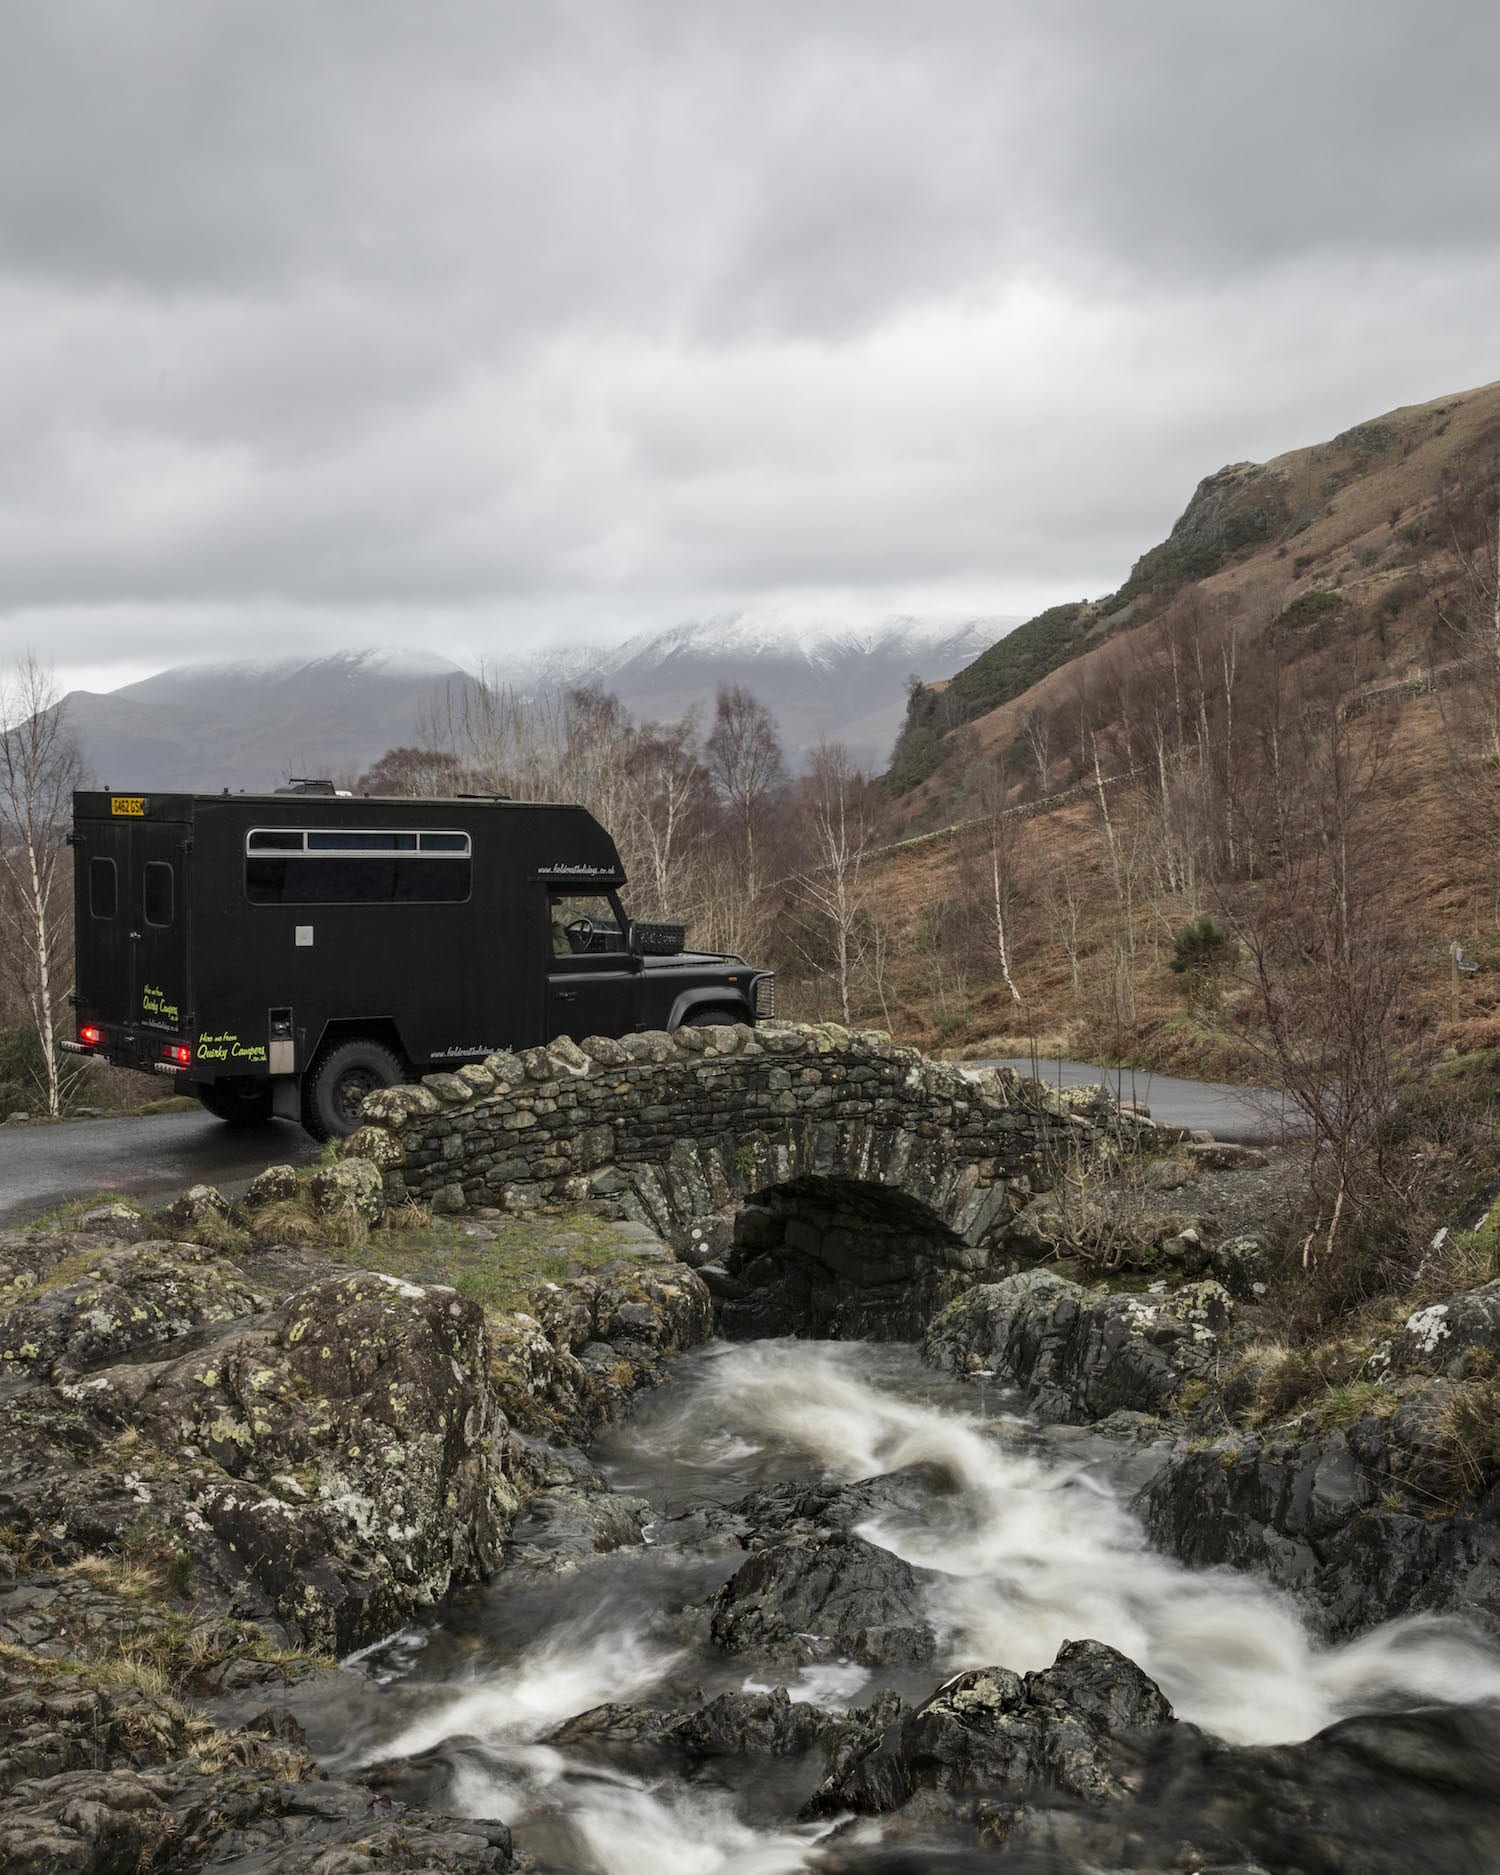 A campervan crossing a tiny stream bridge on an adventure holiday in UK